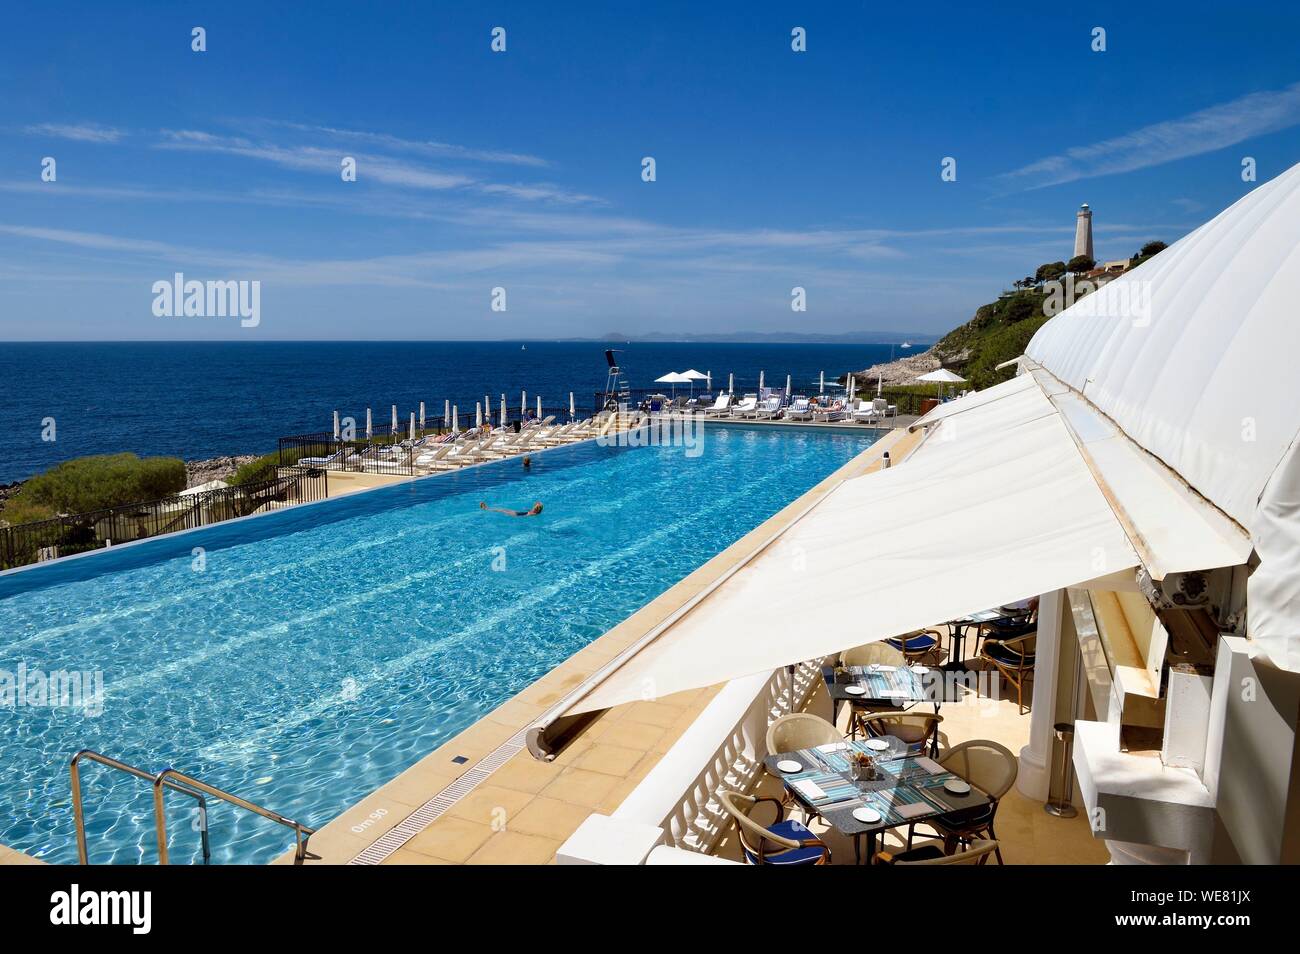 France, Alpes Maritimes, Saint Jean Cap Ferrat, Grand-Hotel du Cap Ferrat, a 5 star palace from Four Seasons Hotel, the chic poolside Club Dauphin by the pool and facing the sea Stock Photo